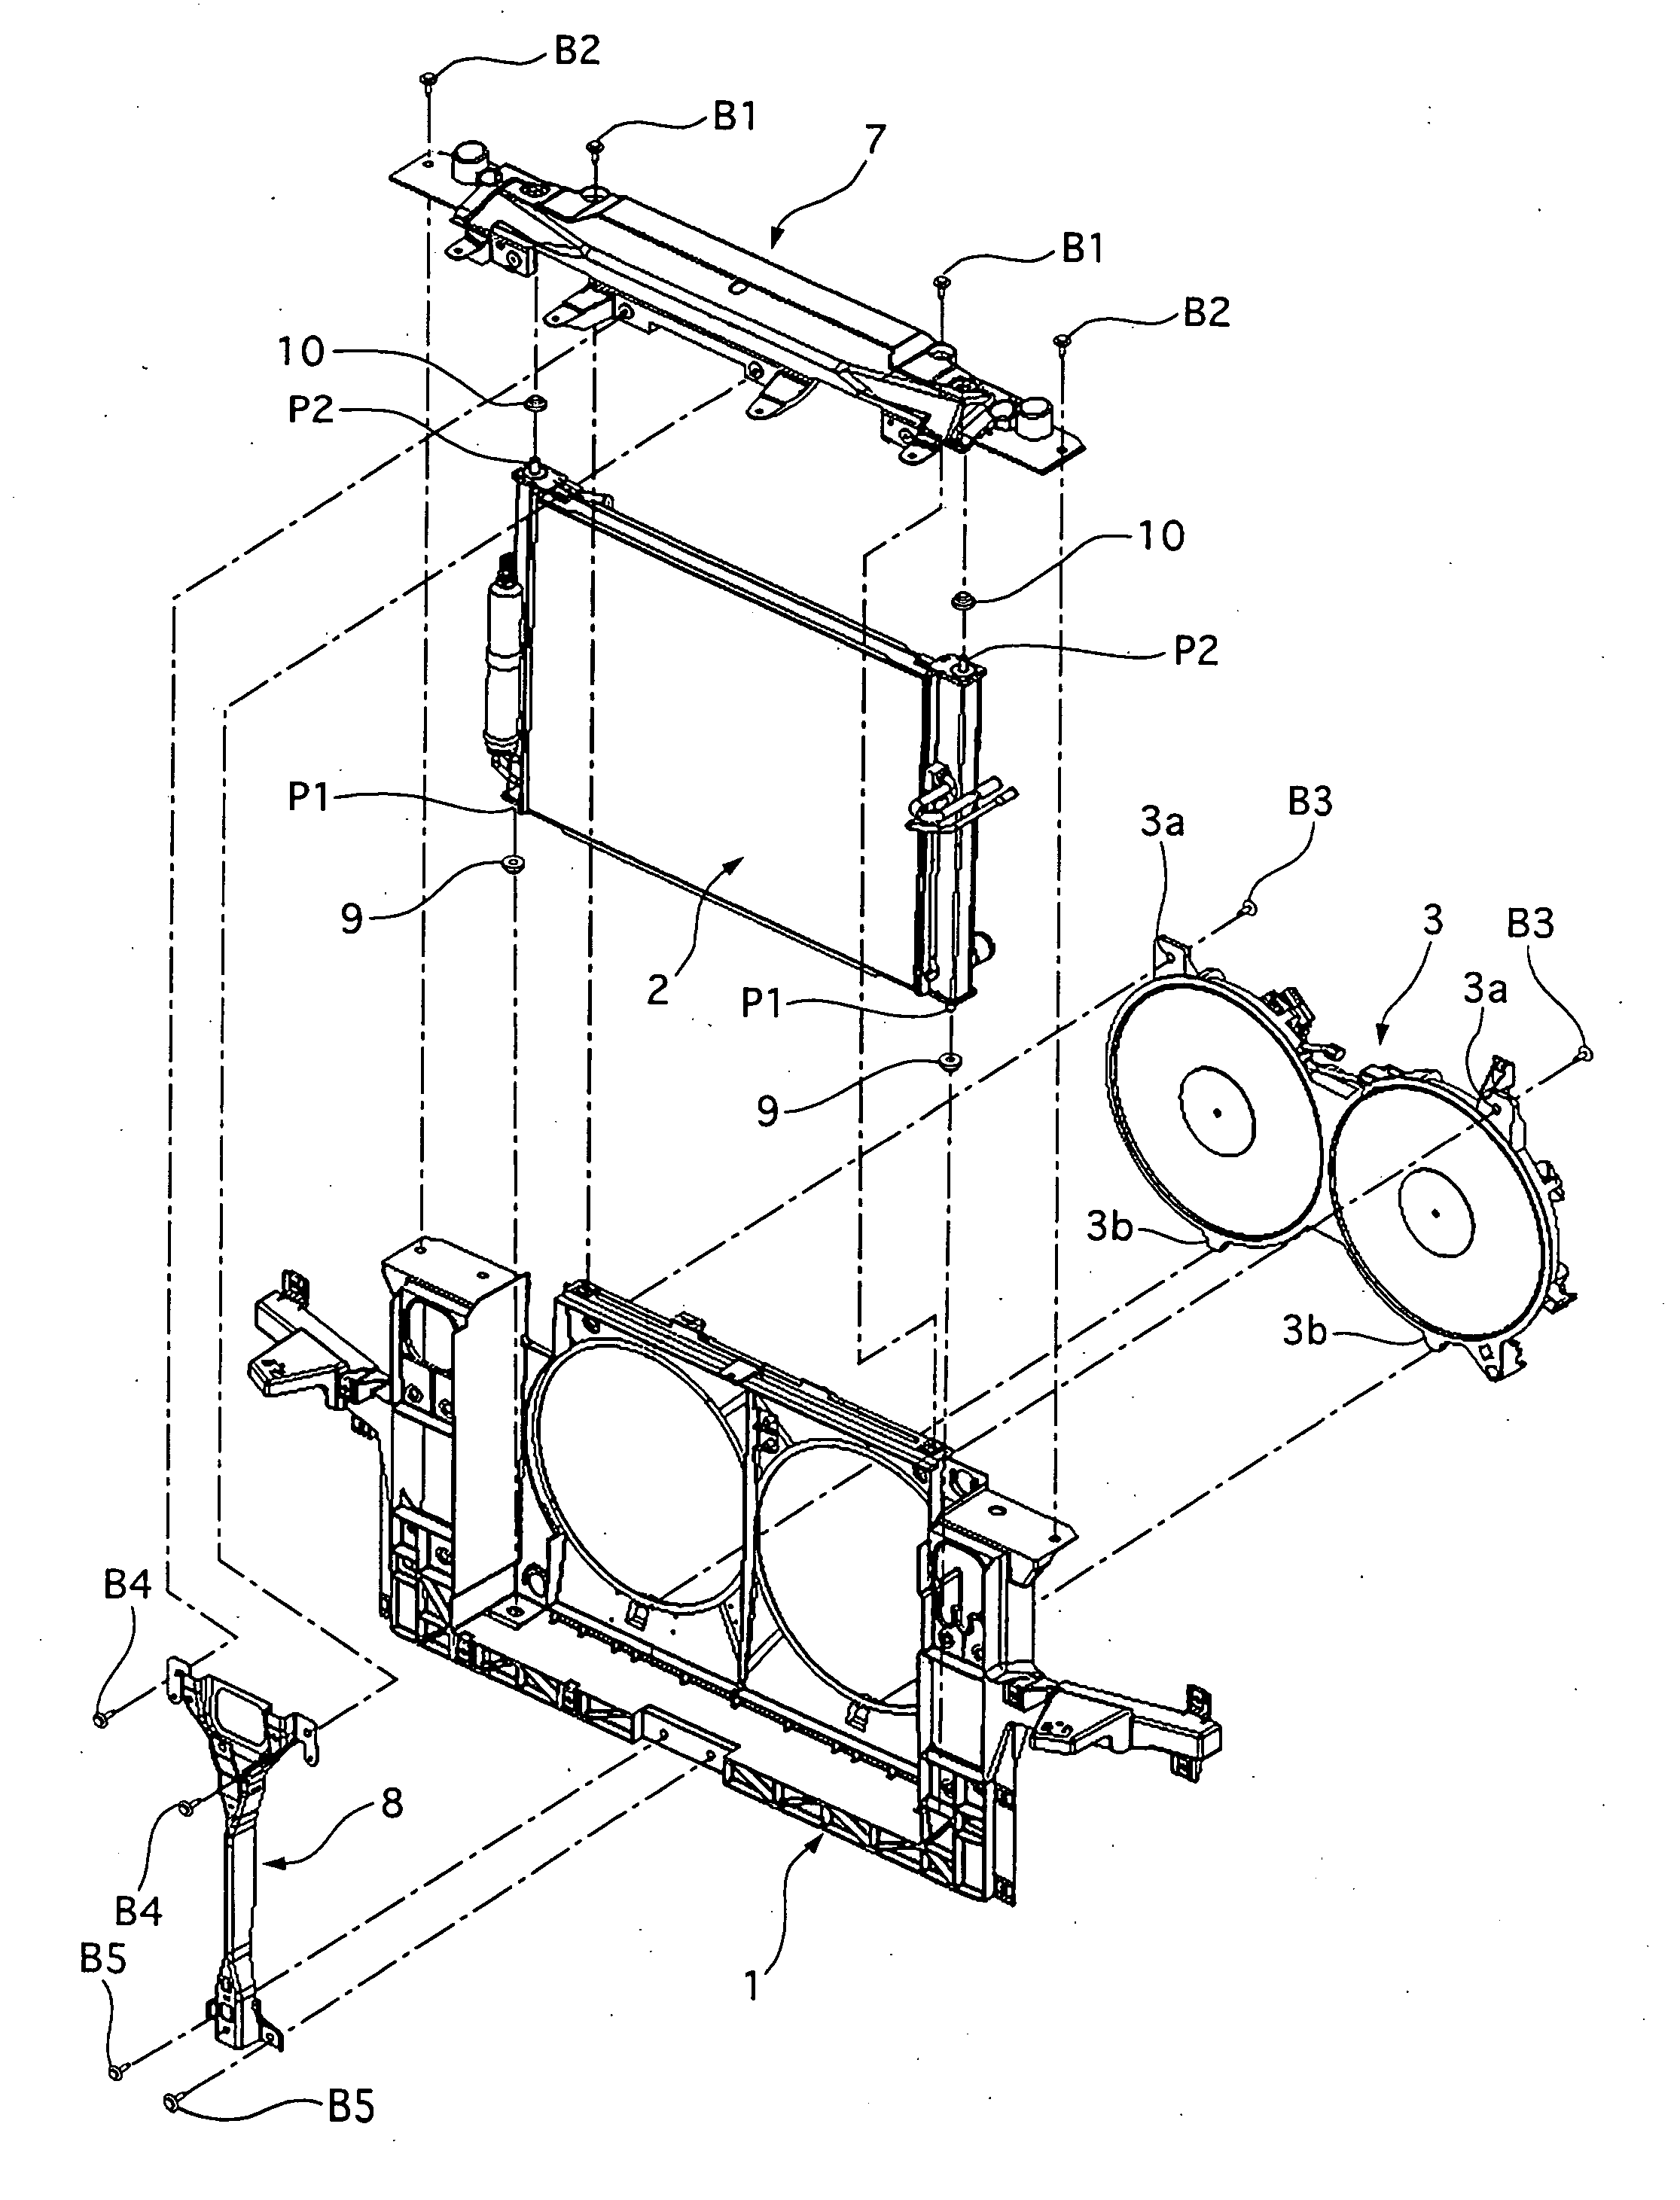 Radiator core support structure